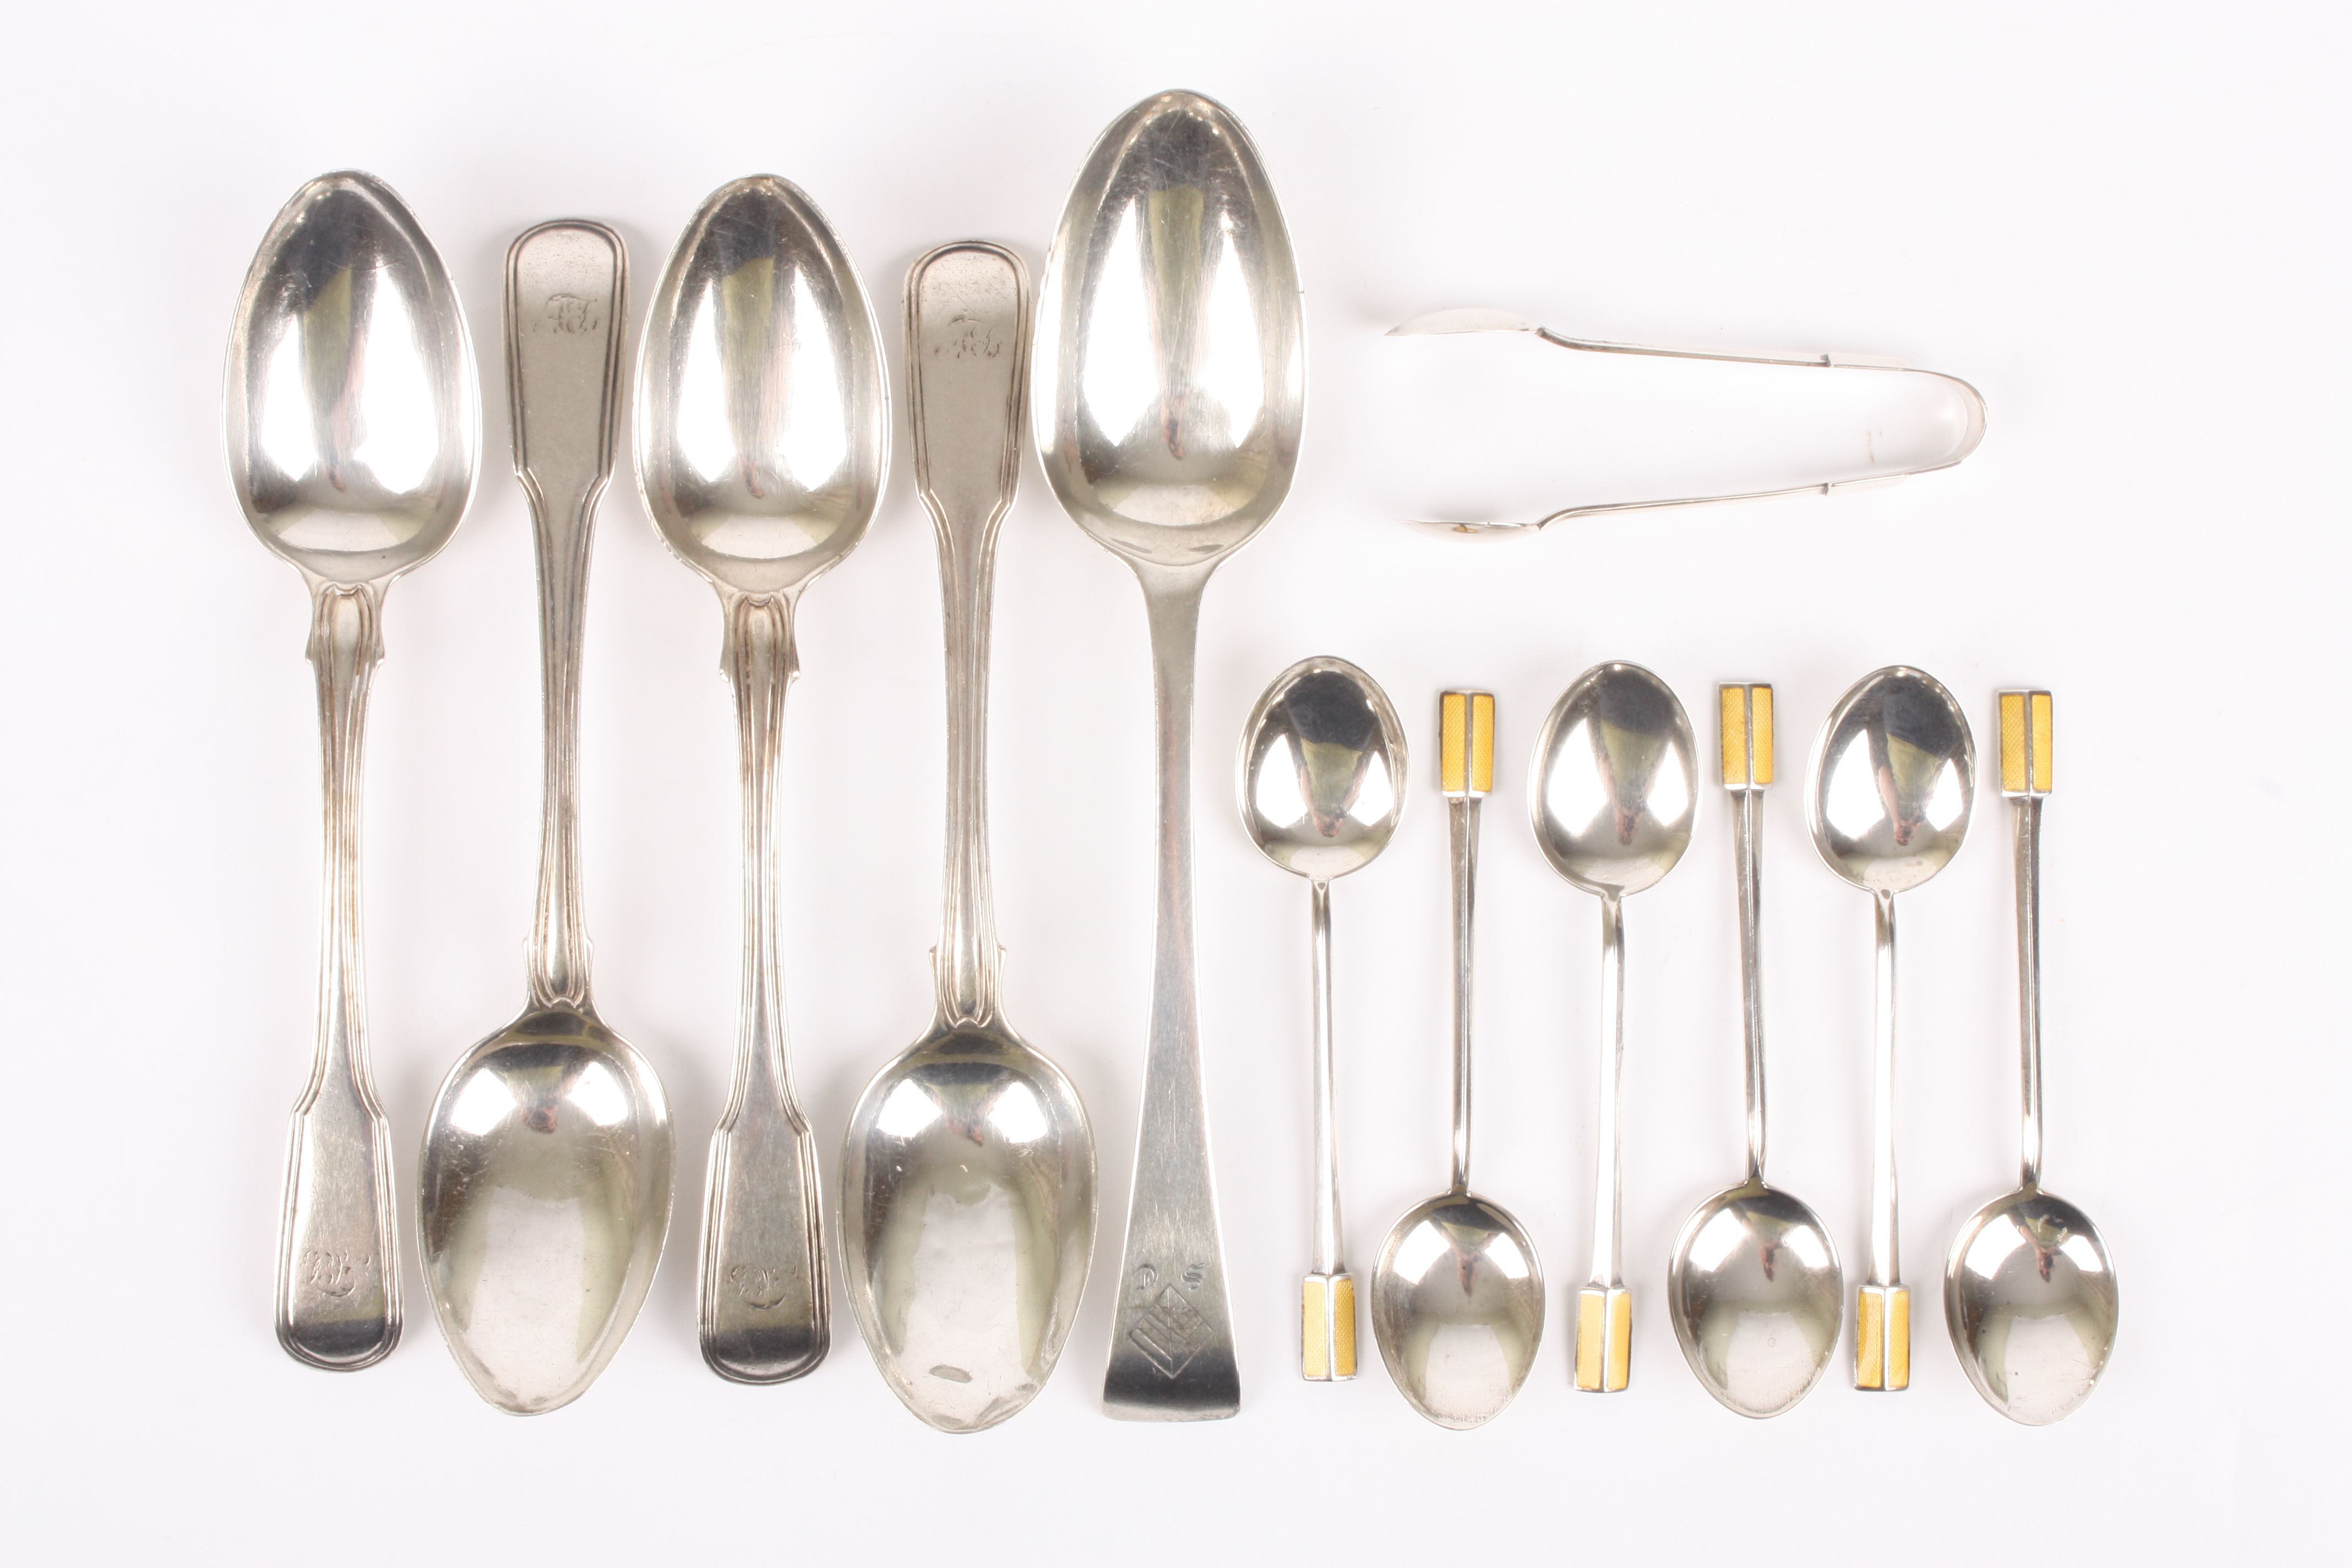 A collection of silver spoons
comprising four Georgian silver spoons, a silver desert spoon, and six